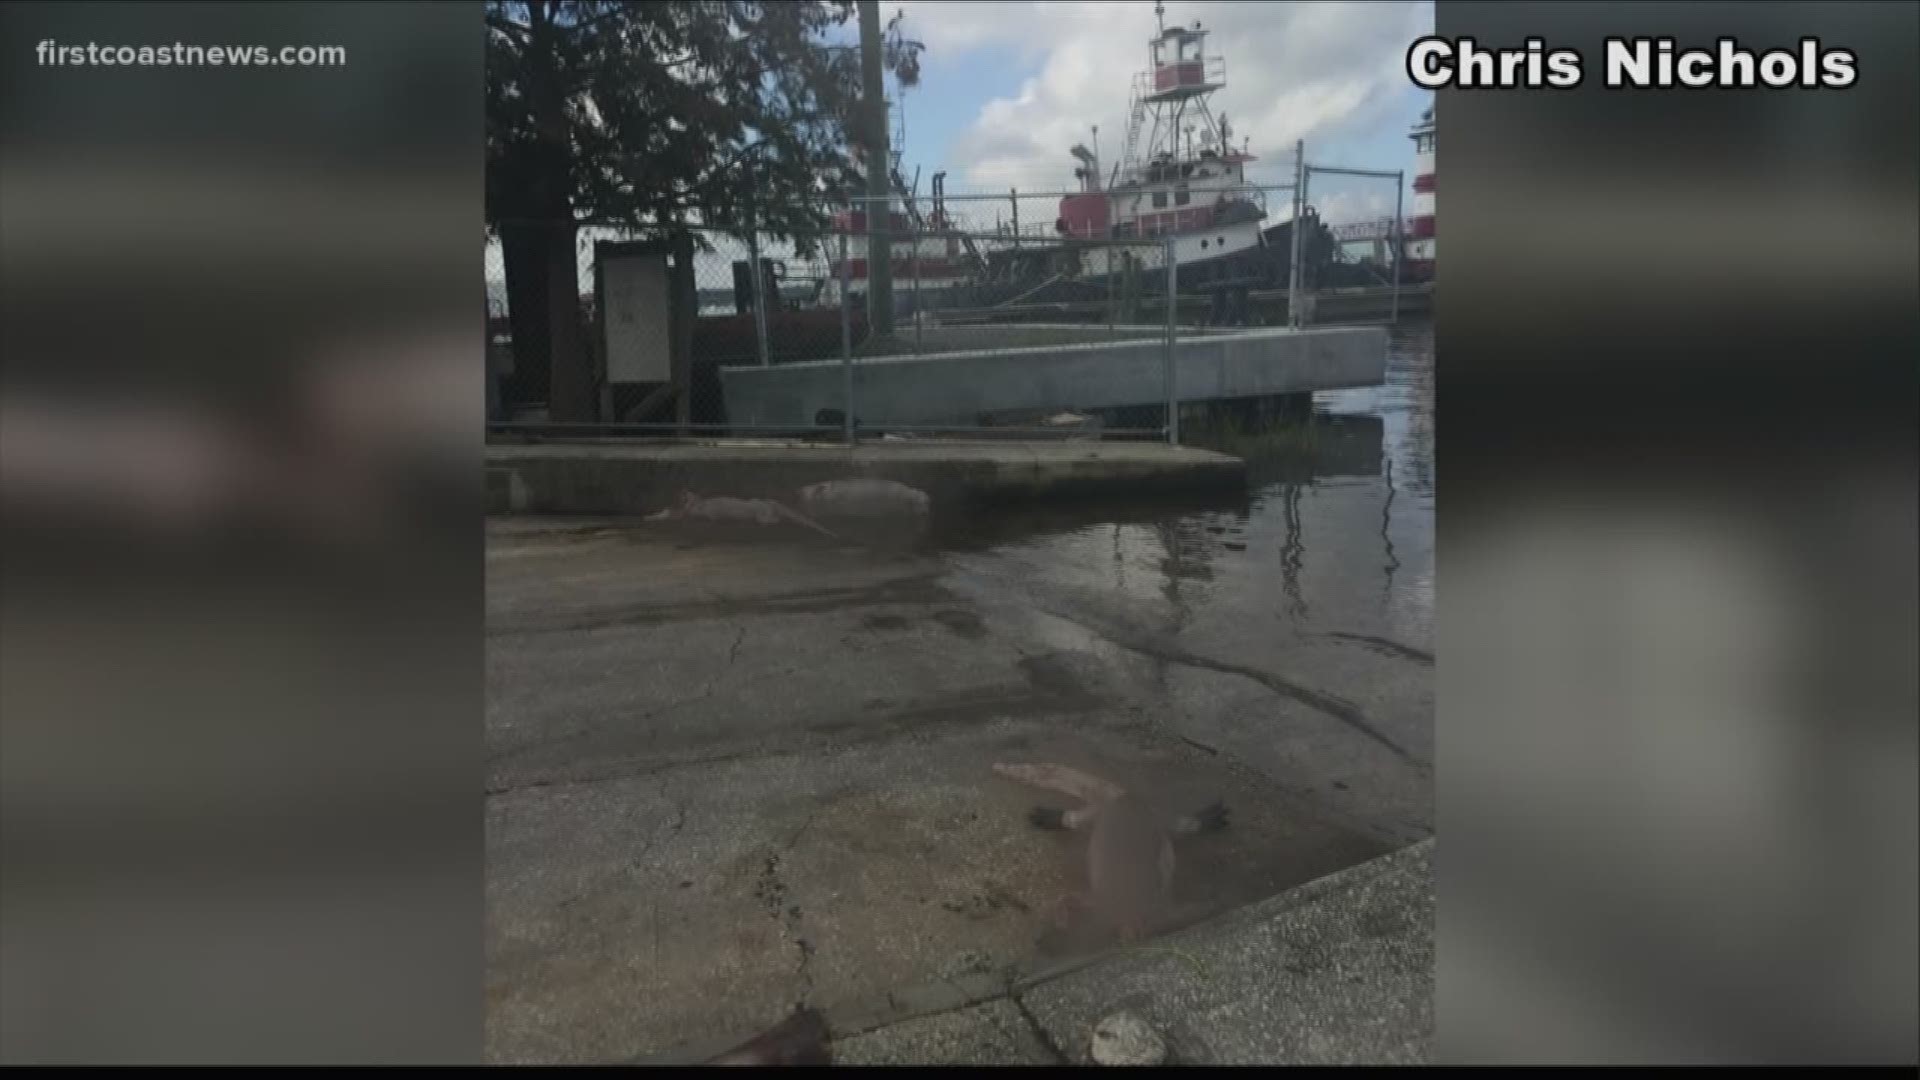 Three alligators were found dumped and skinned at the Arlington Boat Ramp, prompting an investigation by the Florida Fish & Wildlife Conservation Commission.